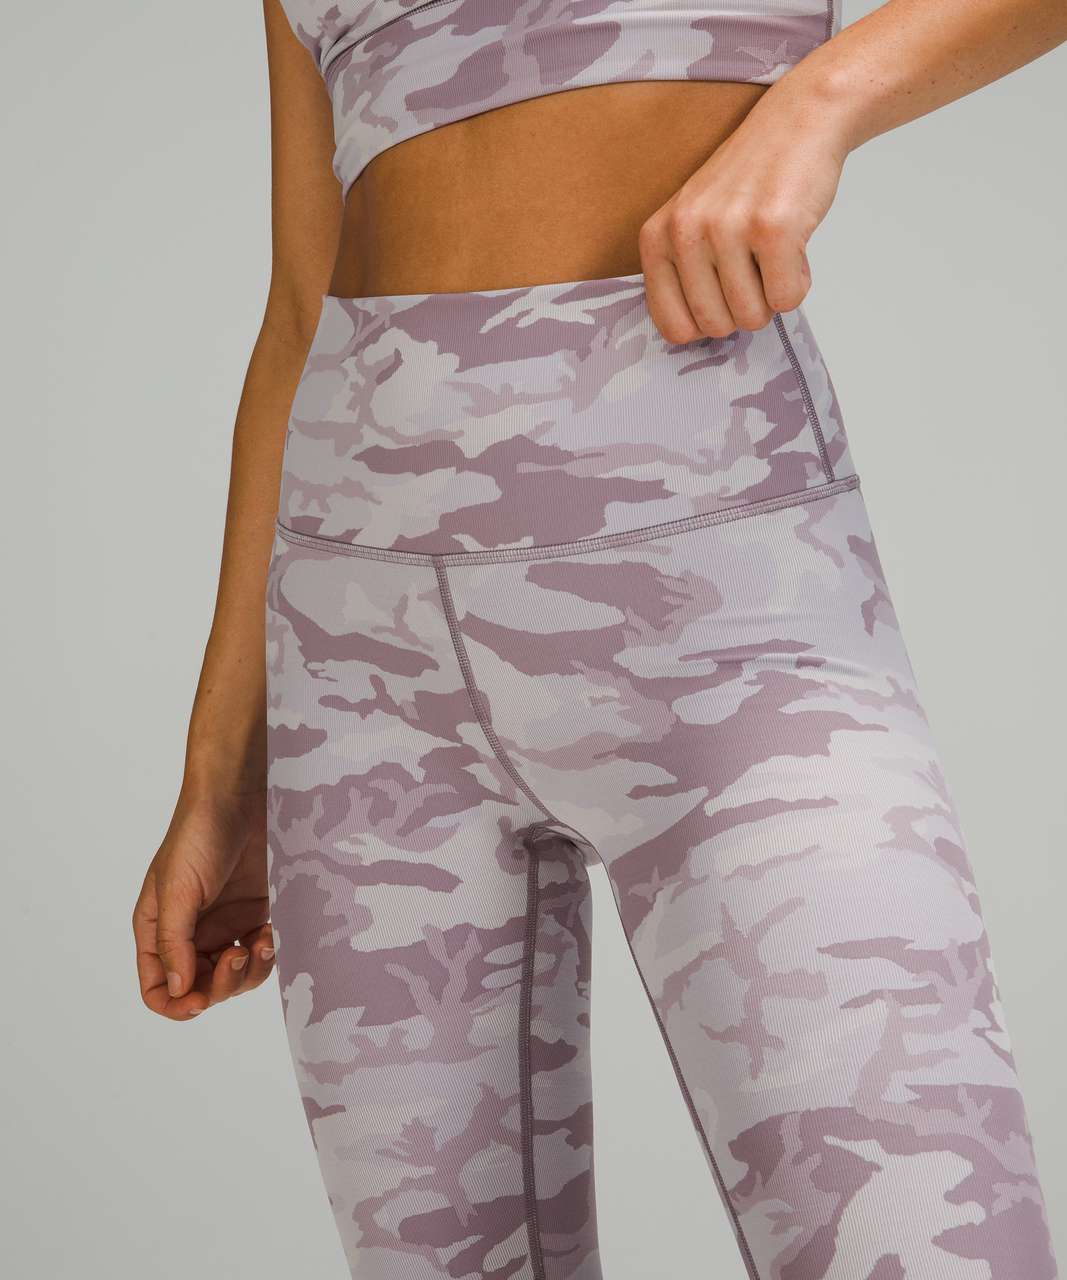 Lululemon Wunder Under High-Rise Tight 25" *Luxtreme - Incognito Camo Jacquard Iced Iris Violet Verbana